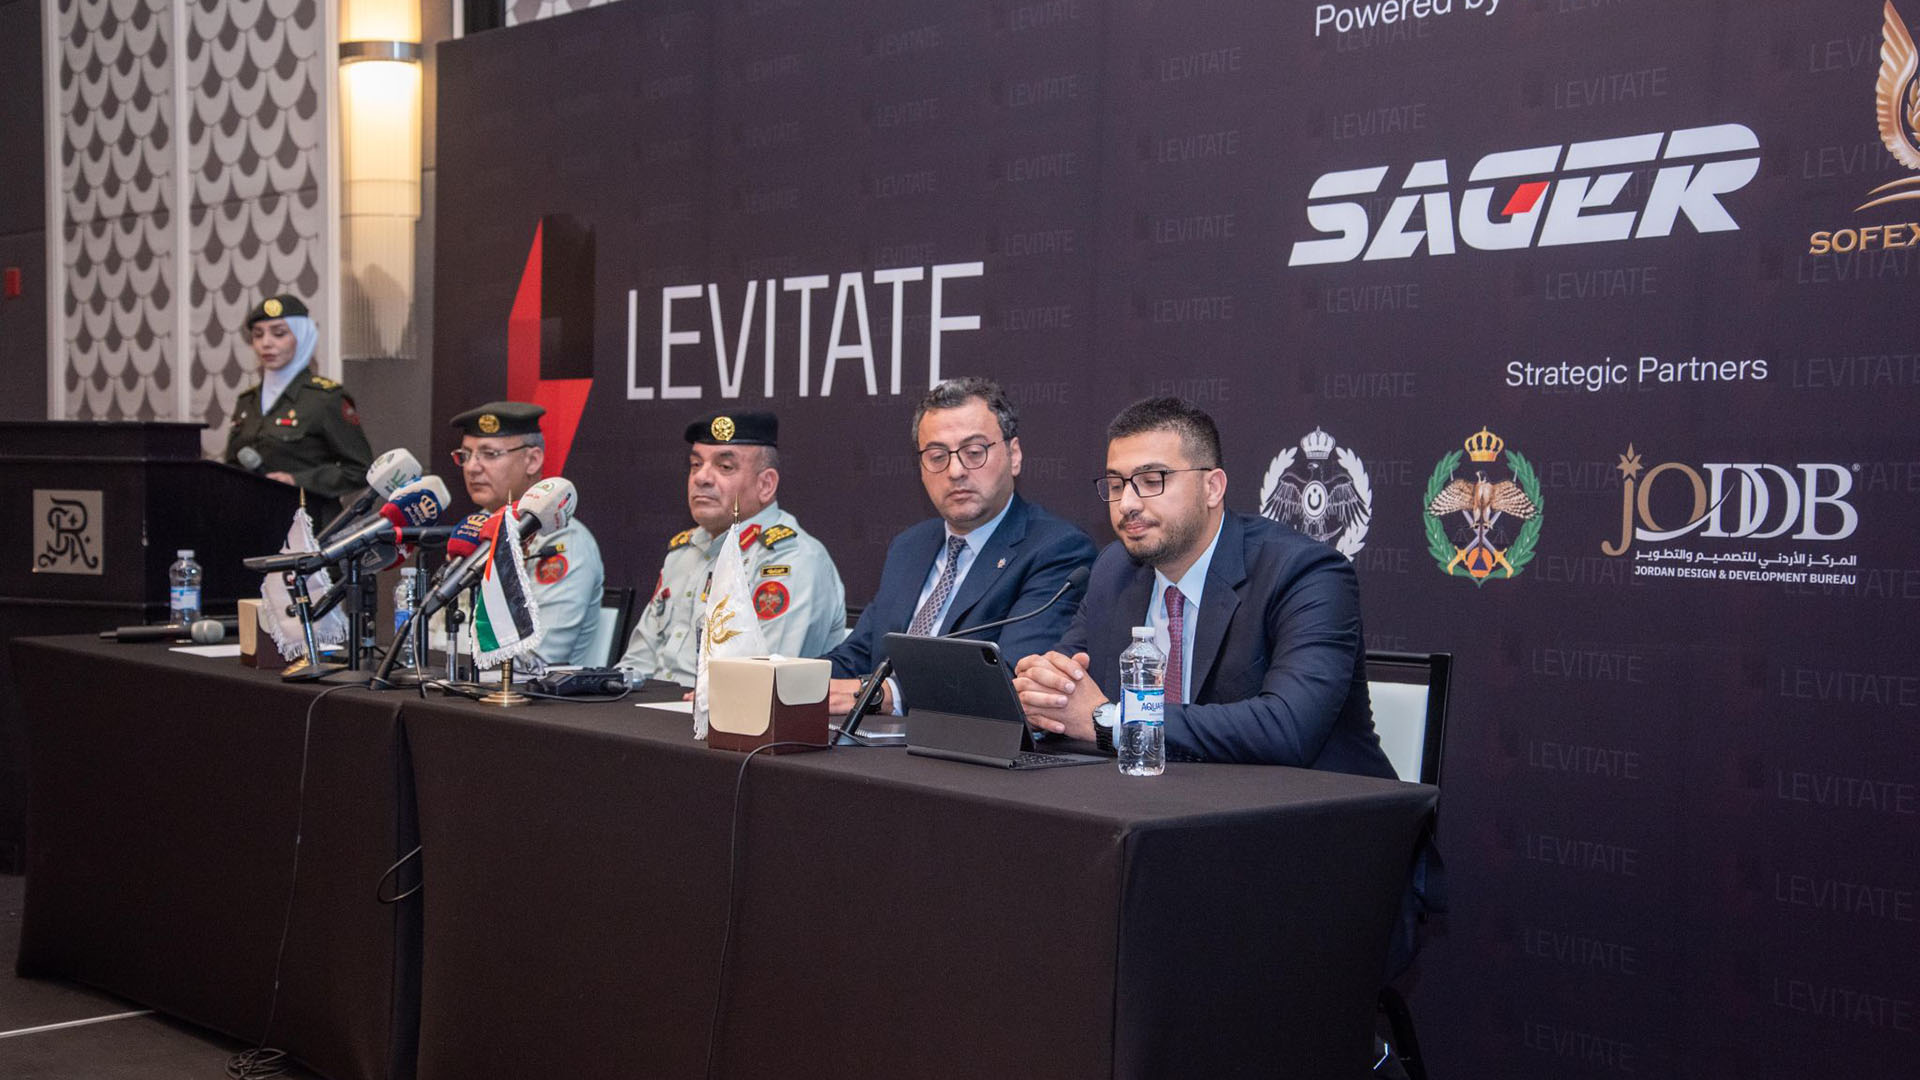 Sager and SOFEX Announce Partnership to Launch LEVITATE, the Premier Drone Event in Jordan